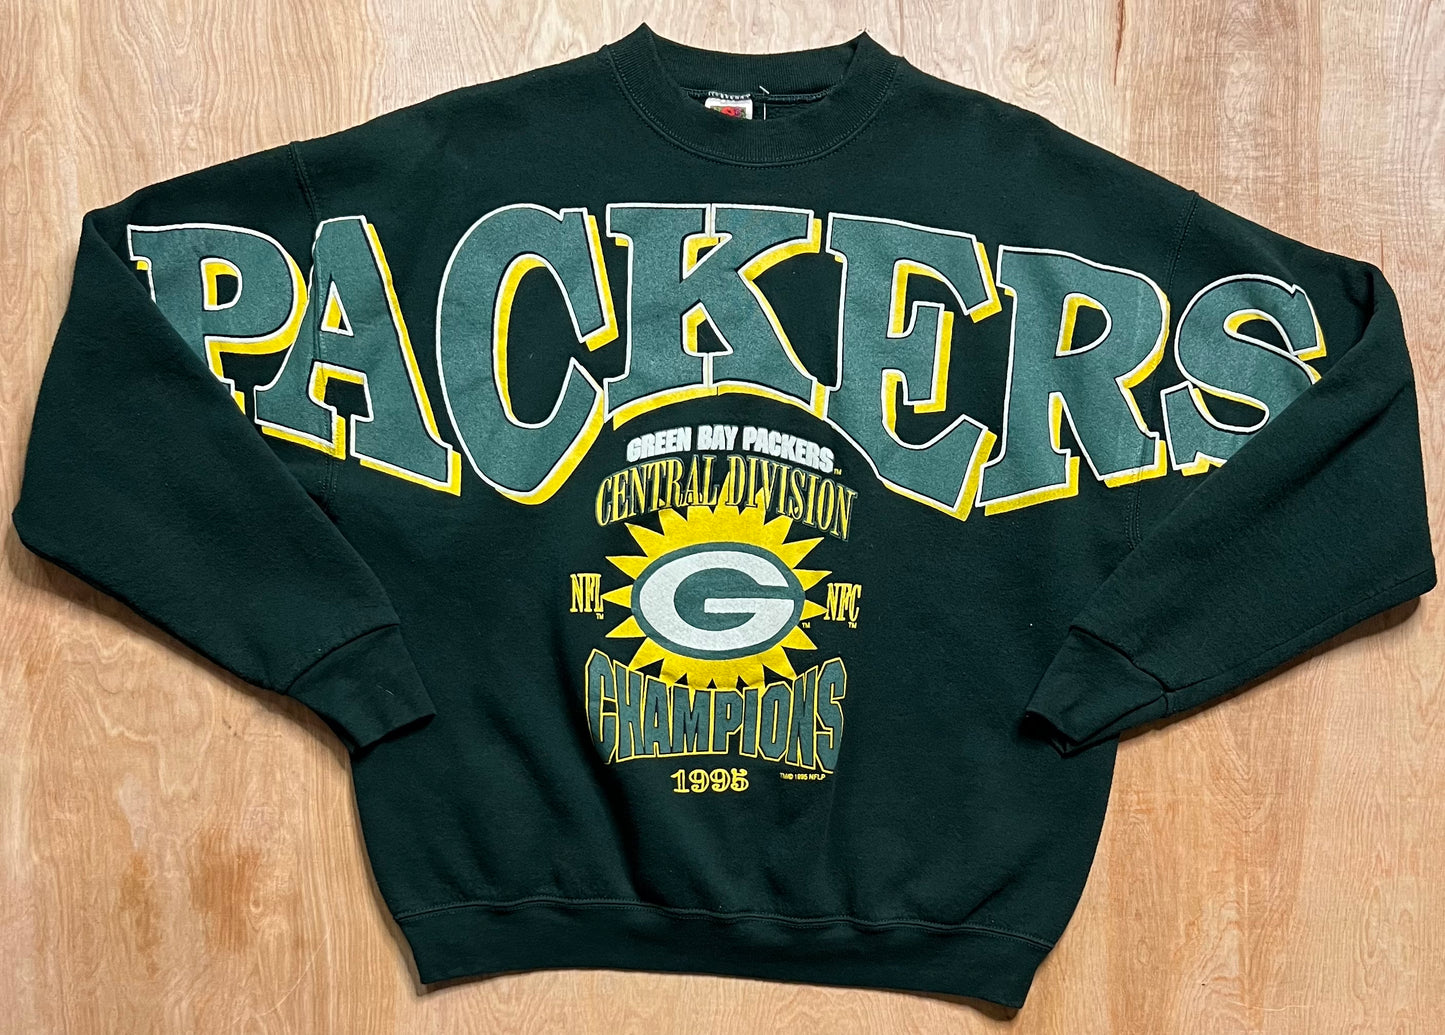 1995 Green Bay Packers Central Division Champions Spellout Crewneck